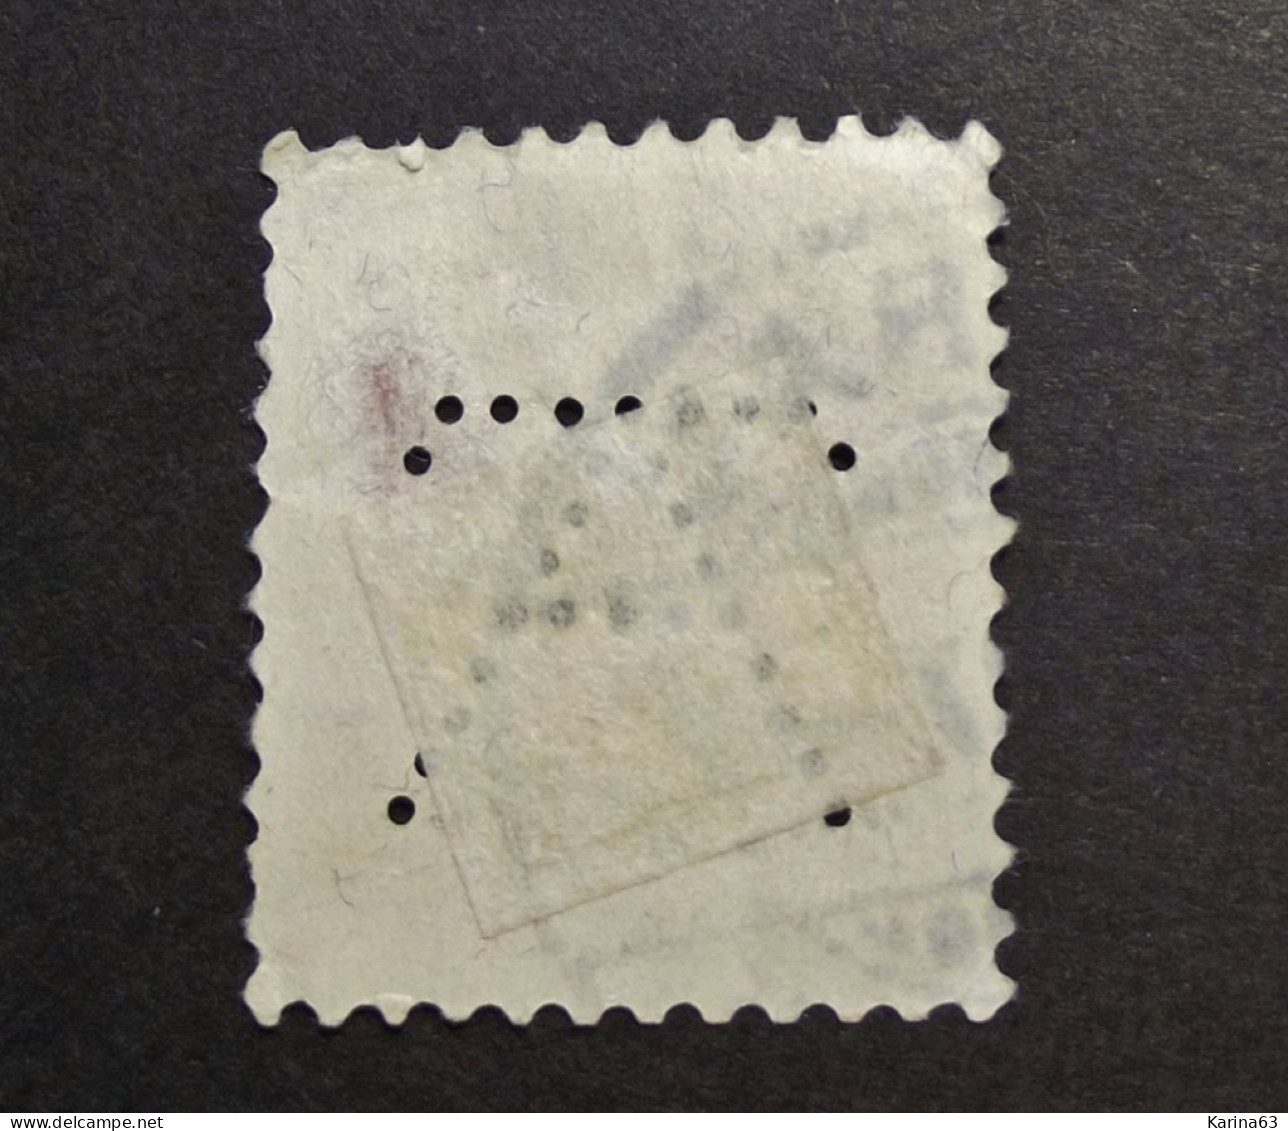 Suisse - Switzerland  - Perfin - Lochung - T A  (weave ) - Unknown  - Cancelled - Perforés